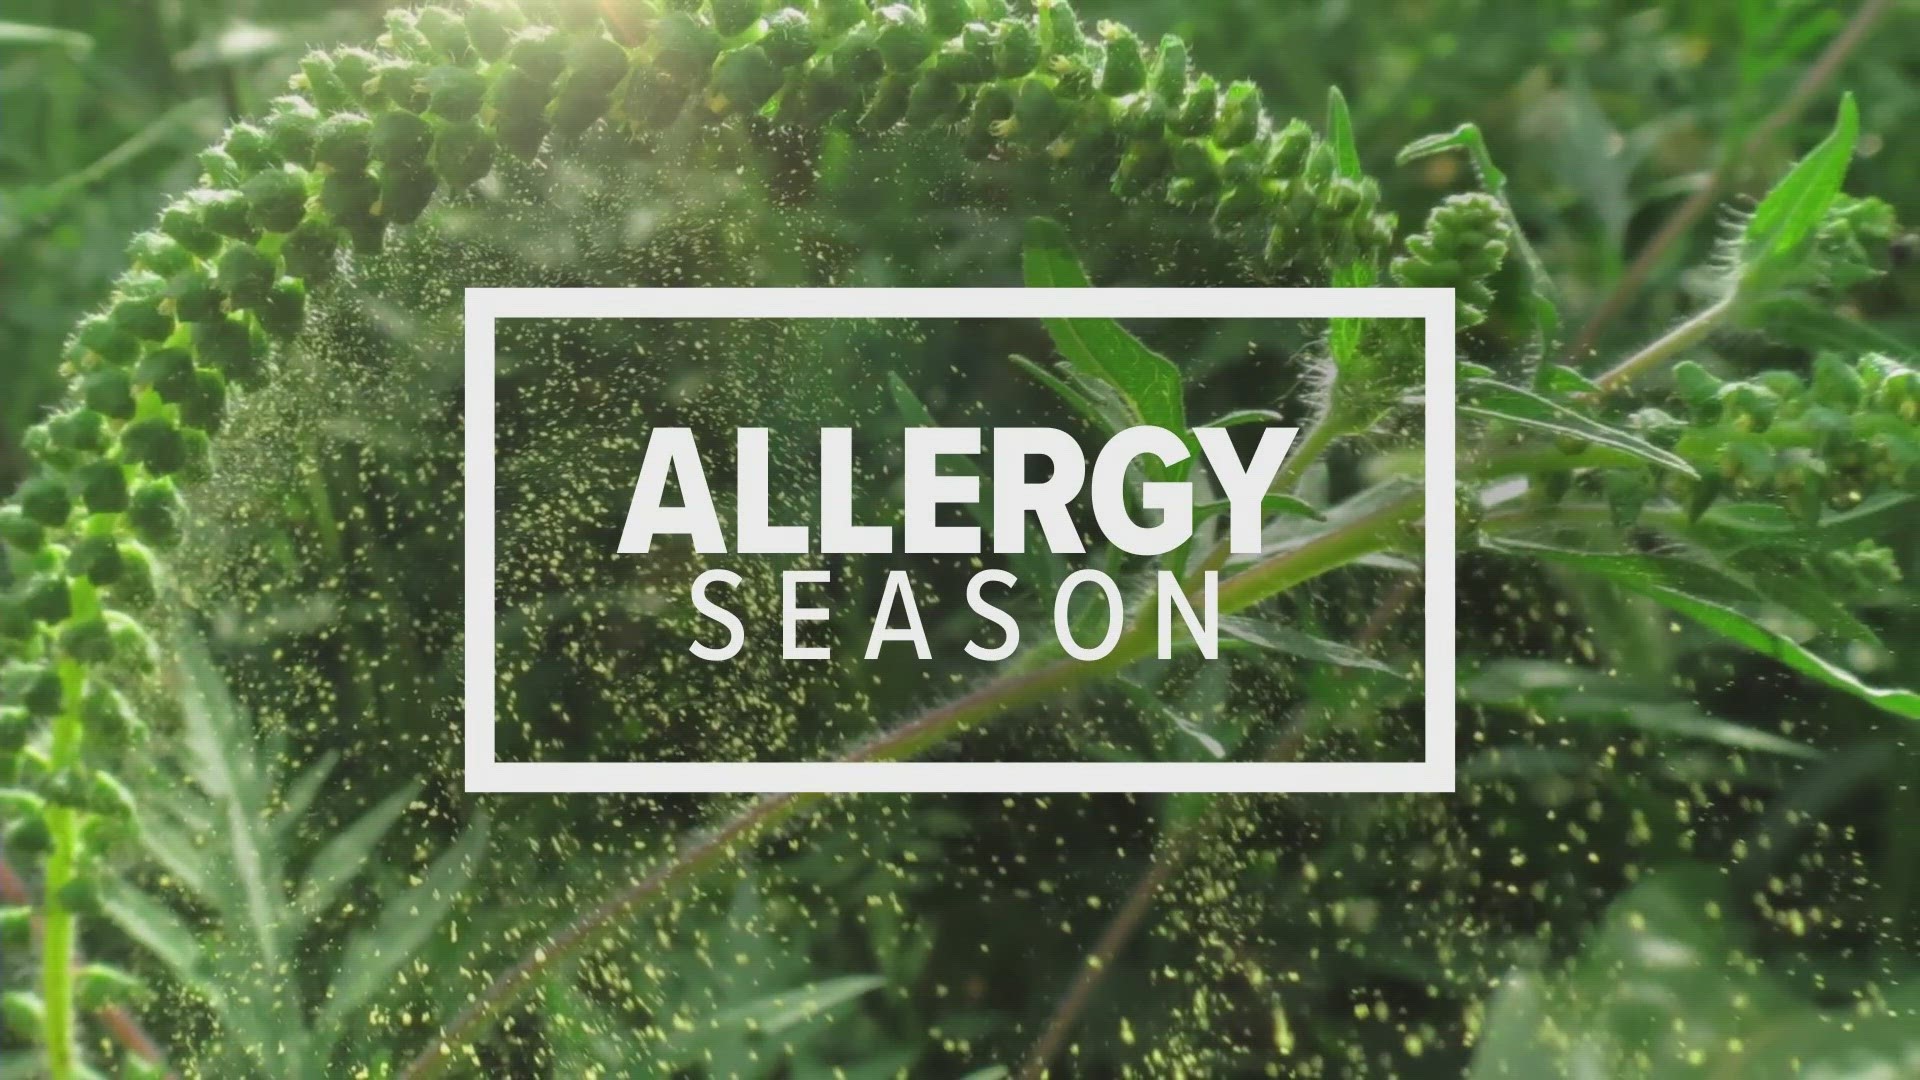 Experts say it's hard to predict when allergy season will peak here in East Tennessee. But when it hits, it hits hard.